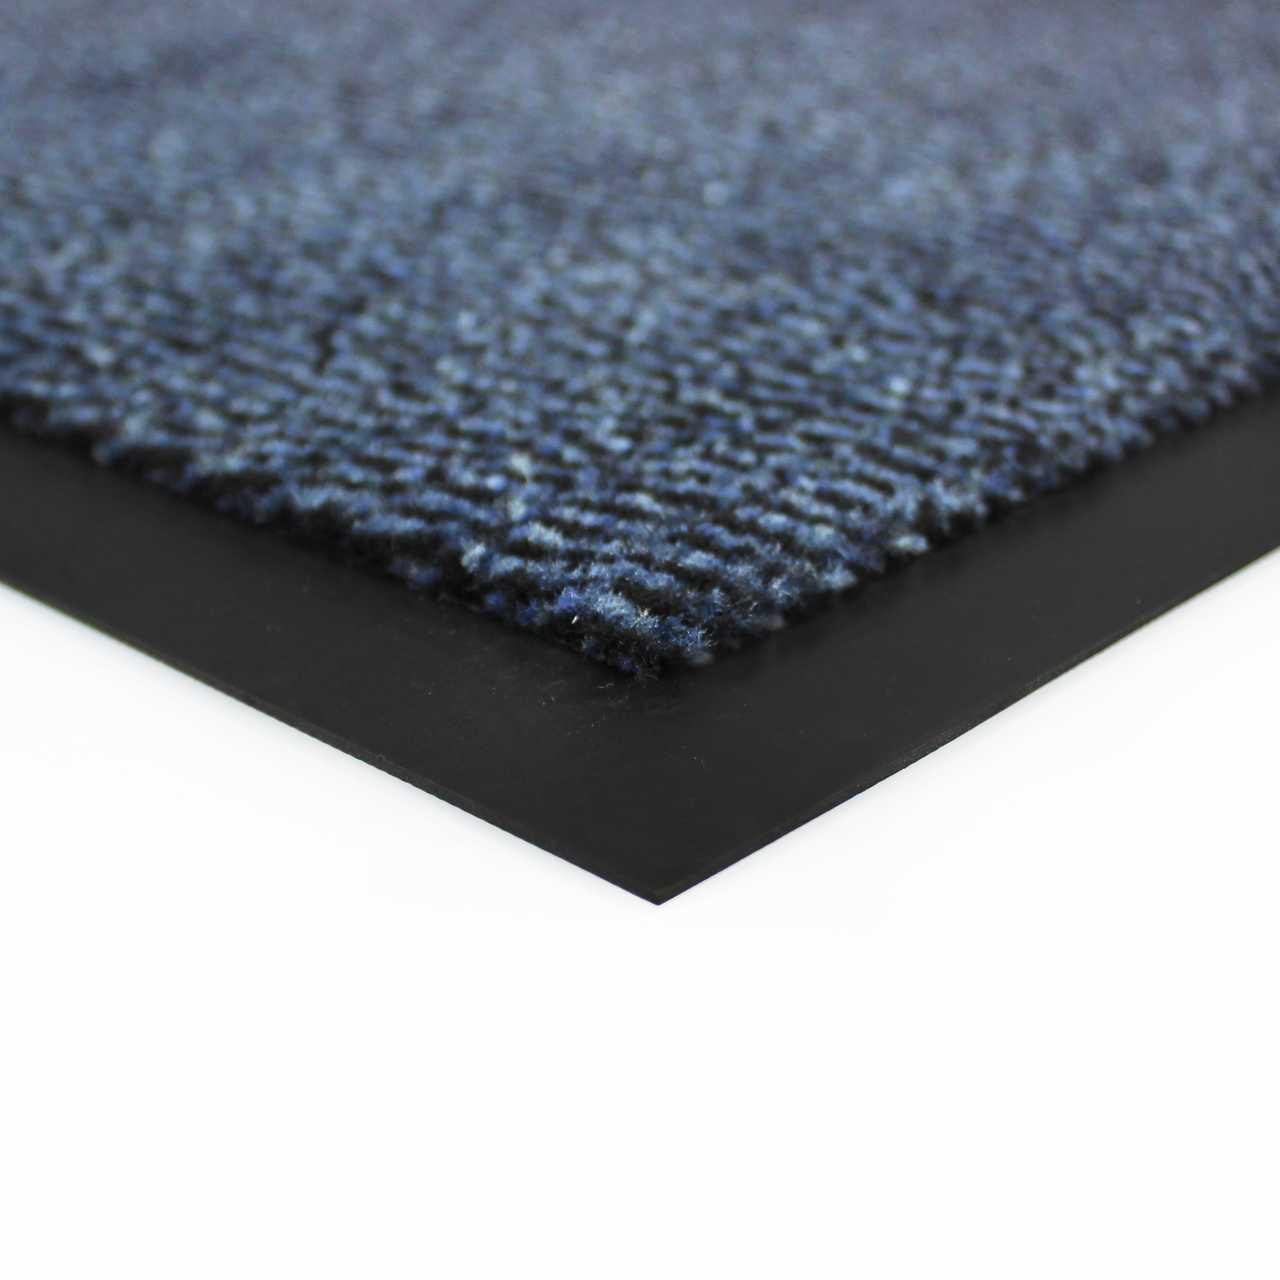 https://cdn11.bigcommerce.com/s-fjwps1jbkv/images/stencil/1280x1280/products/143/3887/ultralux-indoor-entrance-mat-or-polypropylene-fibers-and-anti-slip-vinyl-backed-entry-rug-doormat-or-blue__33027.1689078941.jpg?c=2?imbypass=on